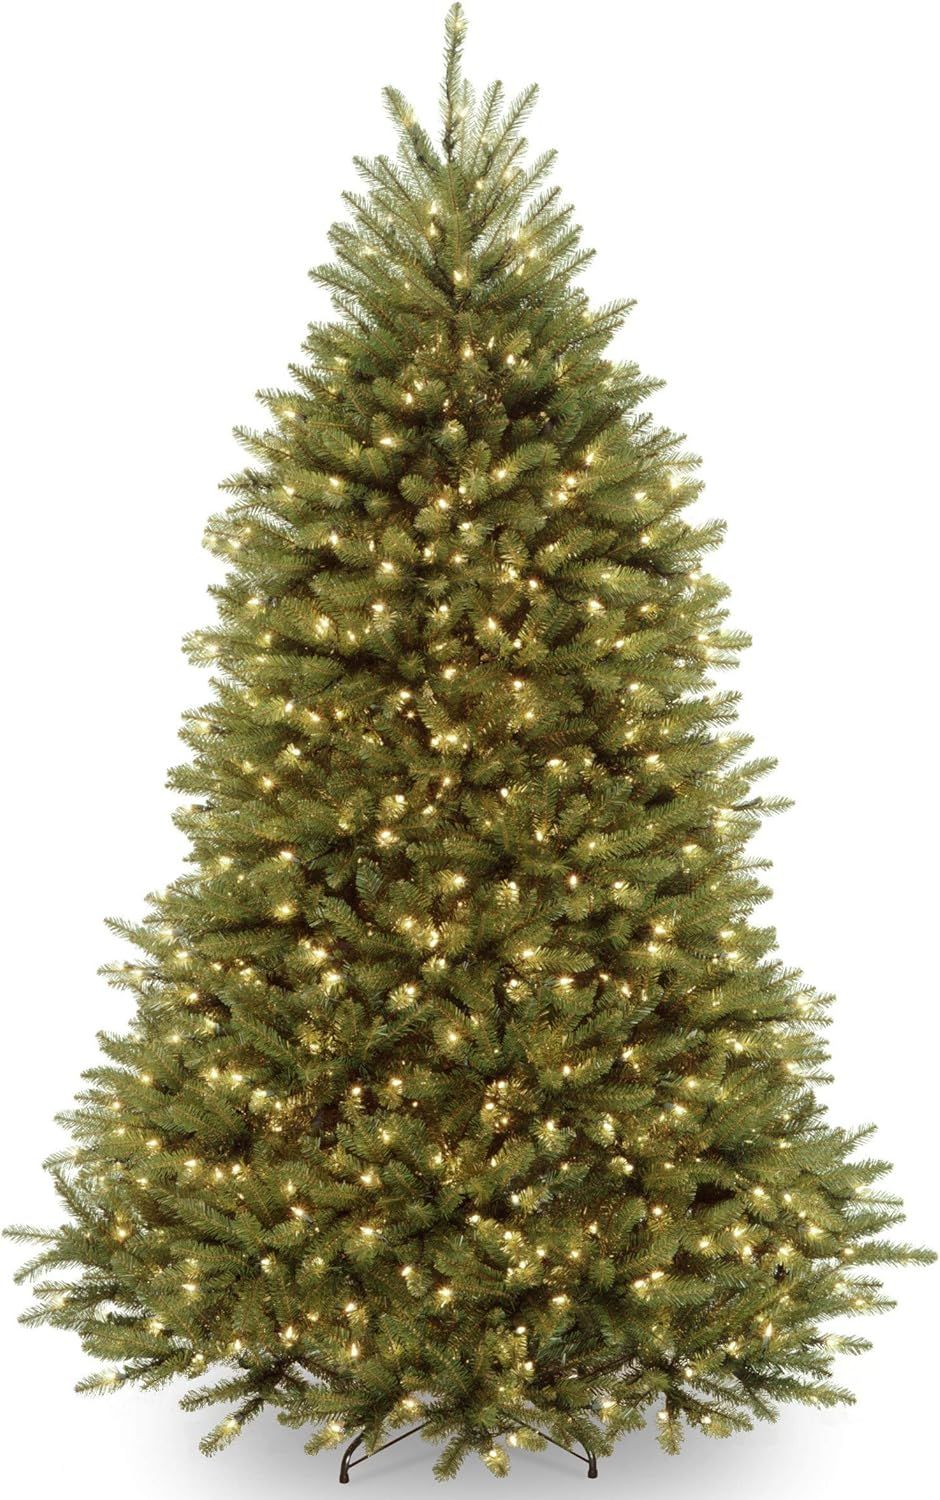 National Tree Company Pre-Lit Artificial Full Christmas Tree, Green, Dunhill Fir, Dual Color LED ... | Amazon (US)